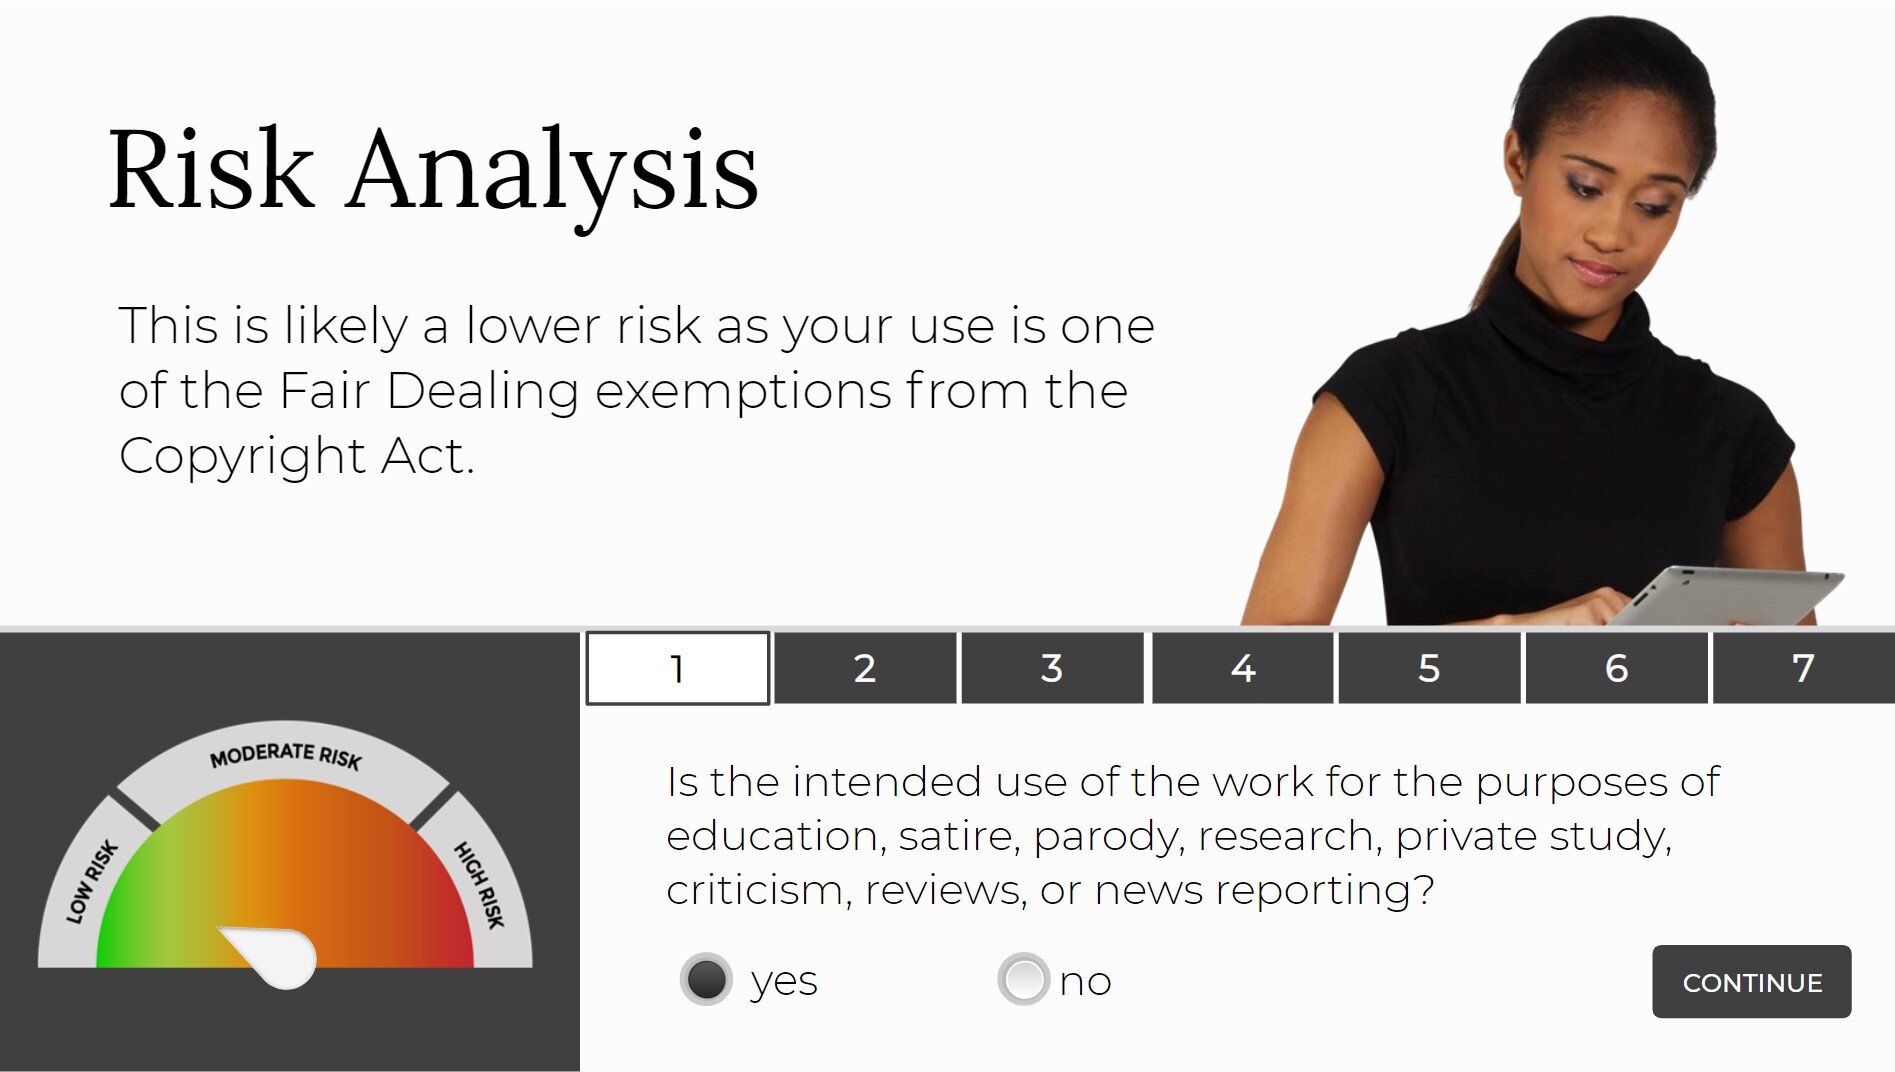  Risk analysis, low risk, indication based on an answer to one of the assessment questions. 